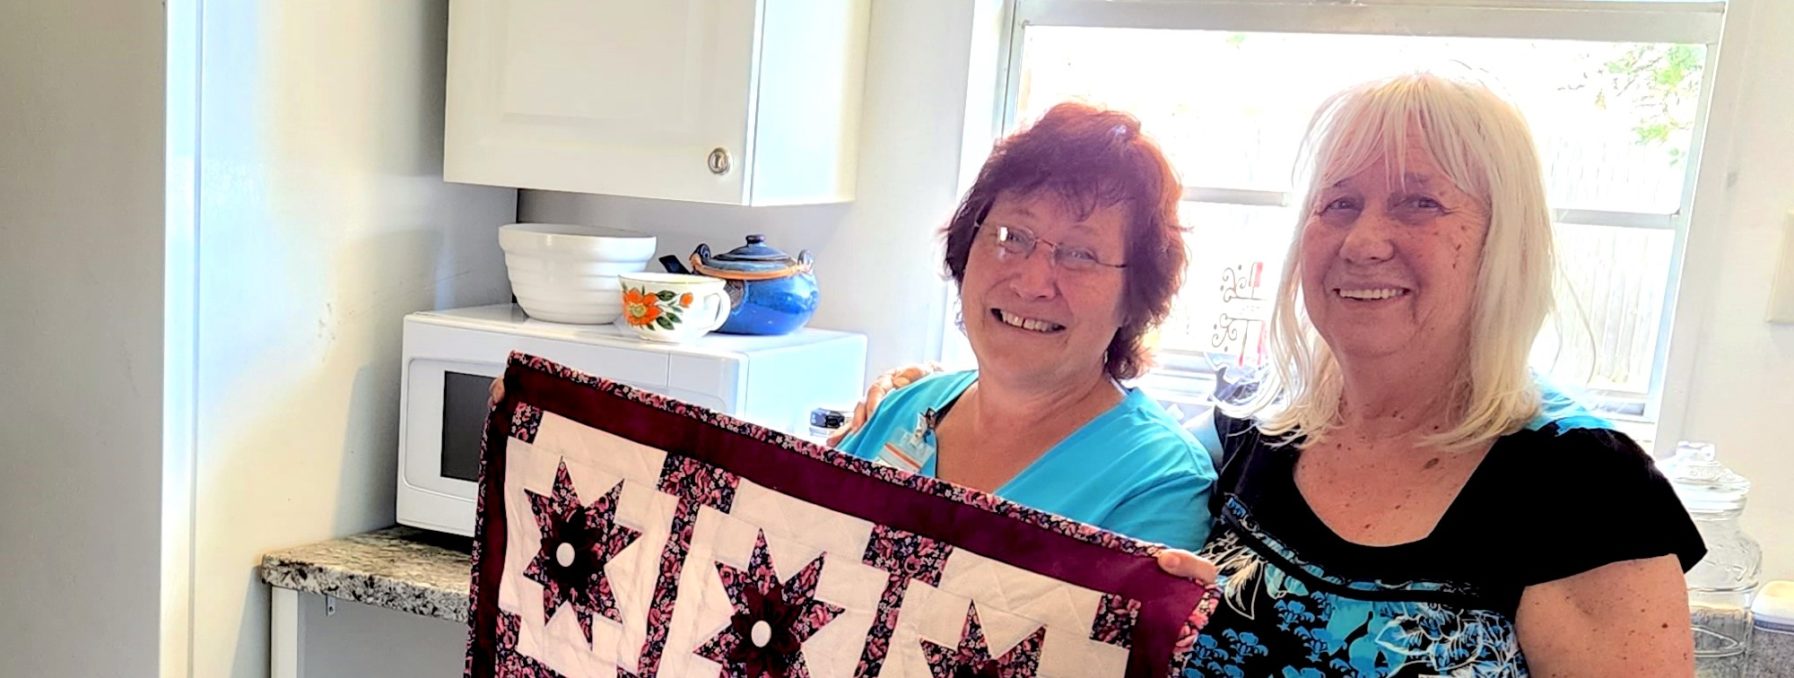 Two women photographed with quilted wall hanging to celebrate the completion of an MDS project in Marianna, FL